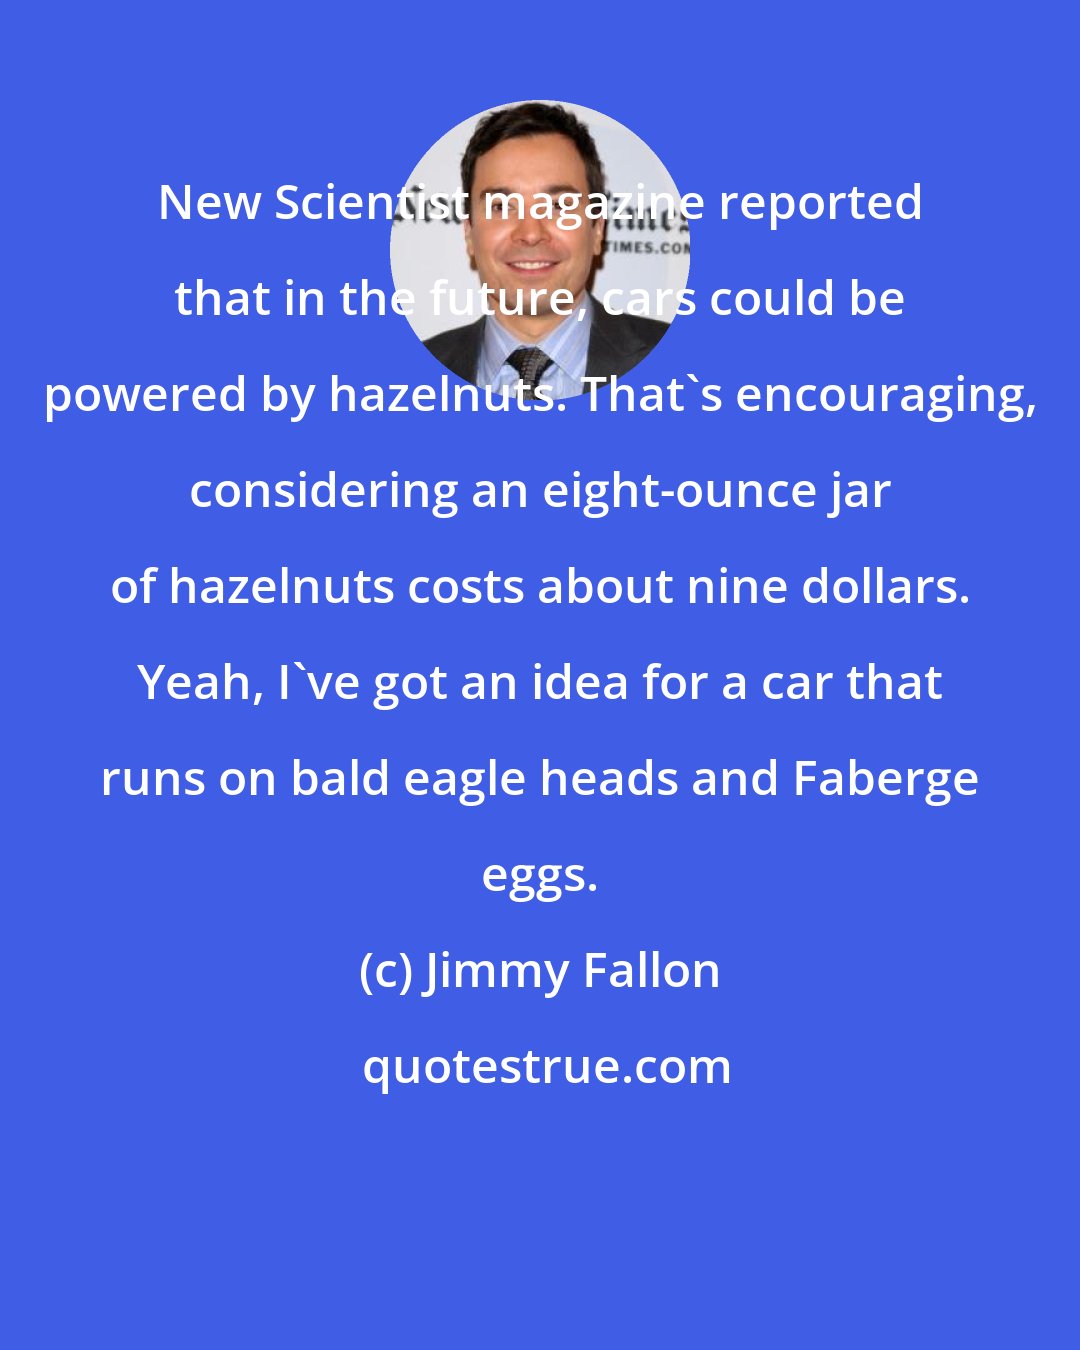 Jimmy Fallon: New Scientist magazine reported that in the future, cars could be powered by hazelnuts. That's encouraging, considering an eight-ounce jar of hazelnuts costs about nine dollars. Yeah, I've got an idea for a car that runs on bald eagle heads and Faberge eggs.